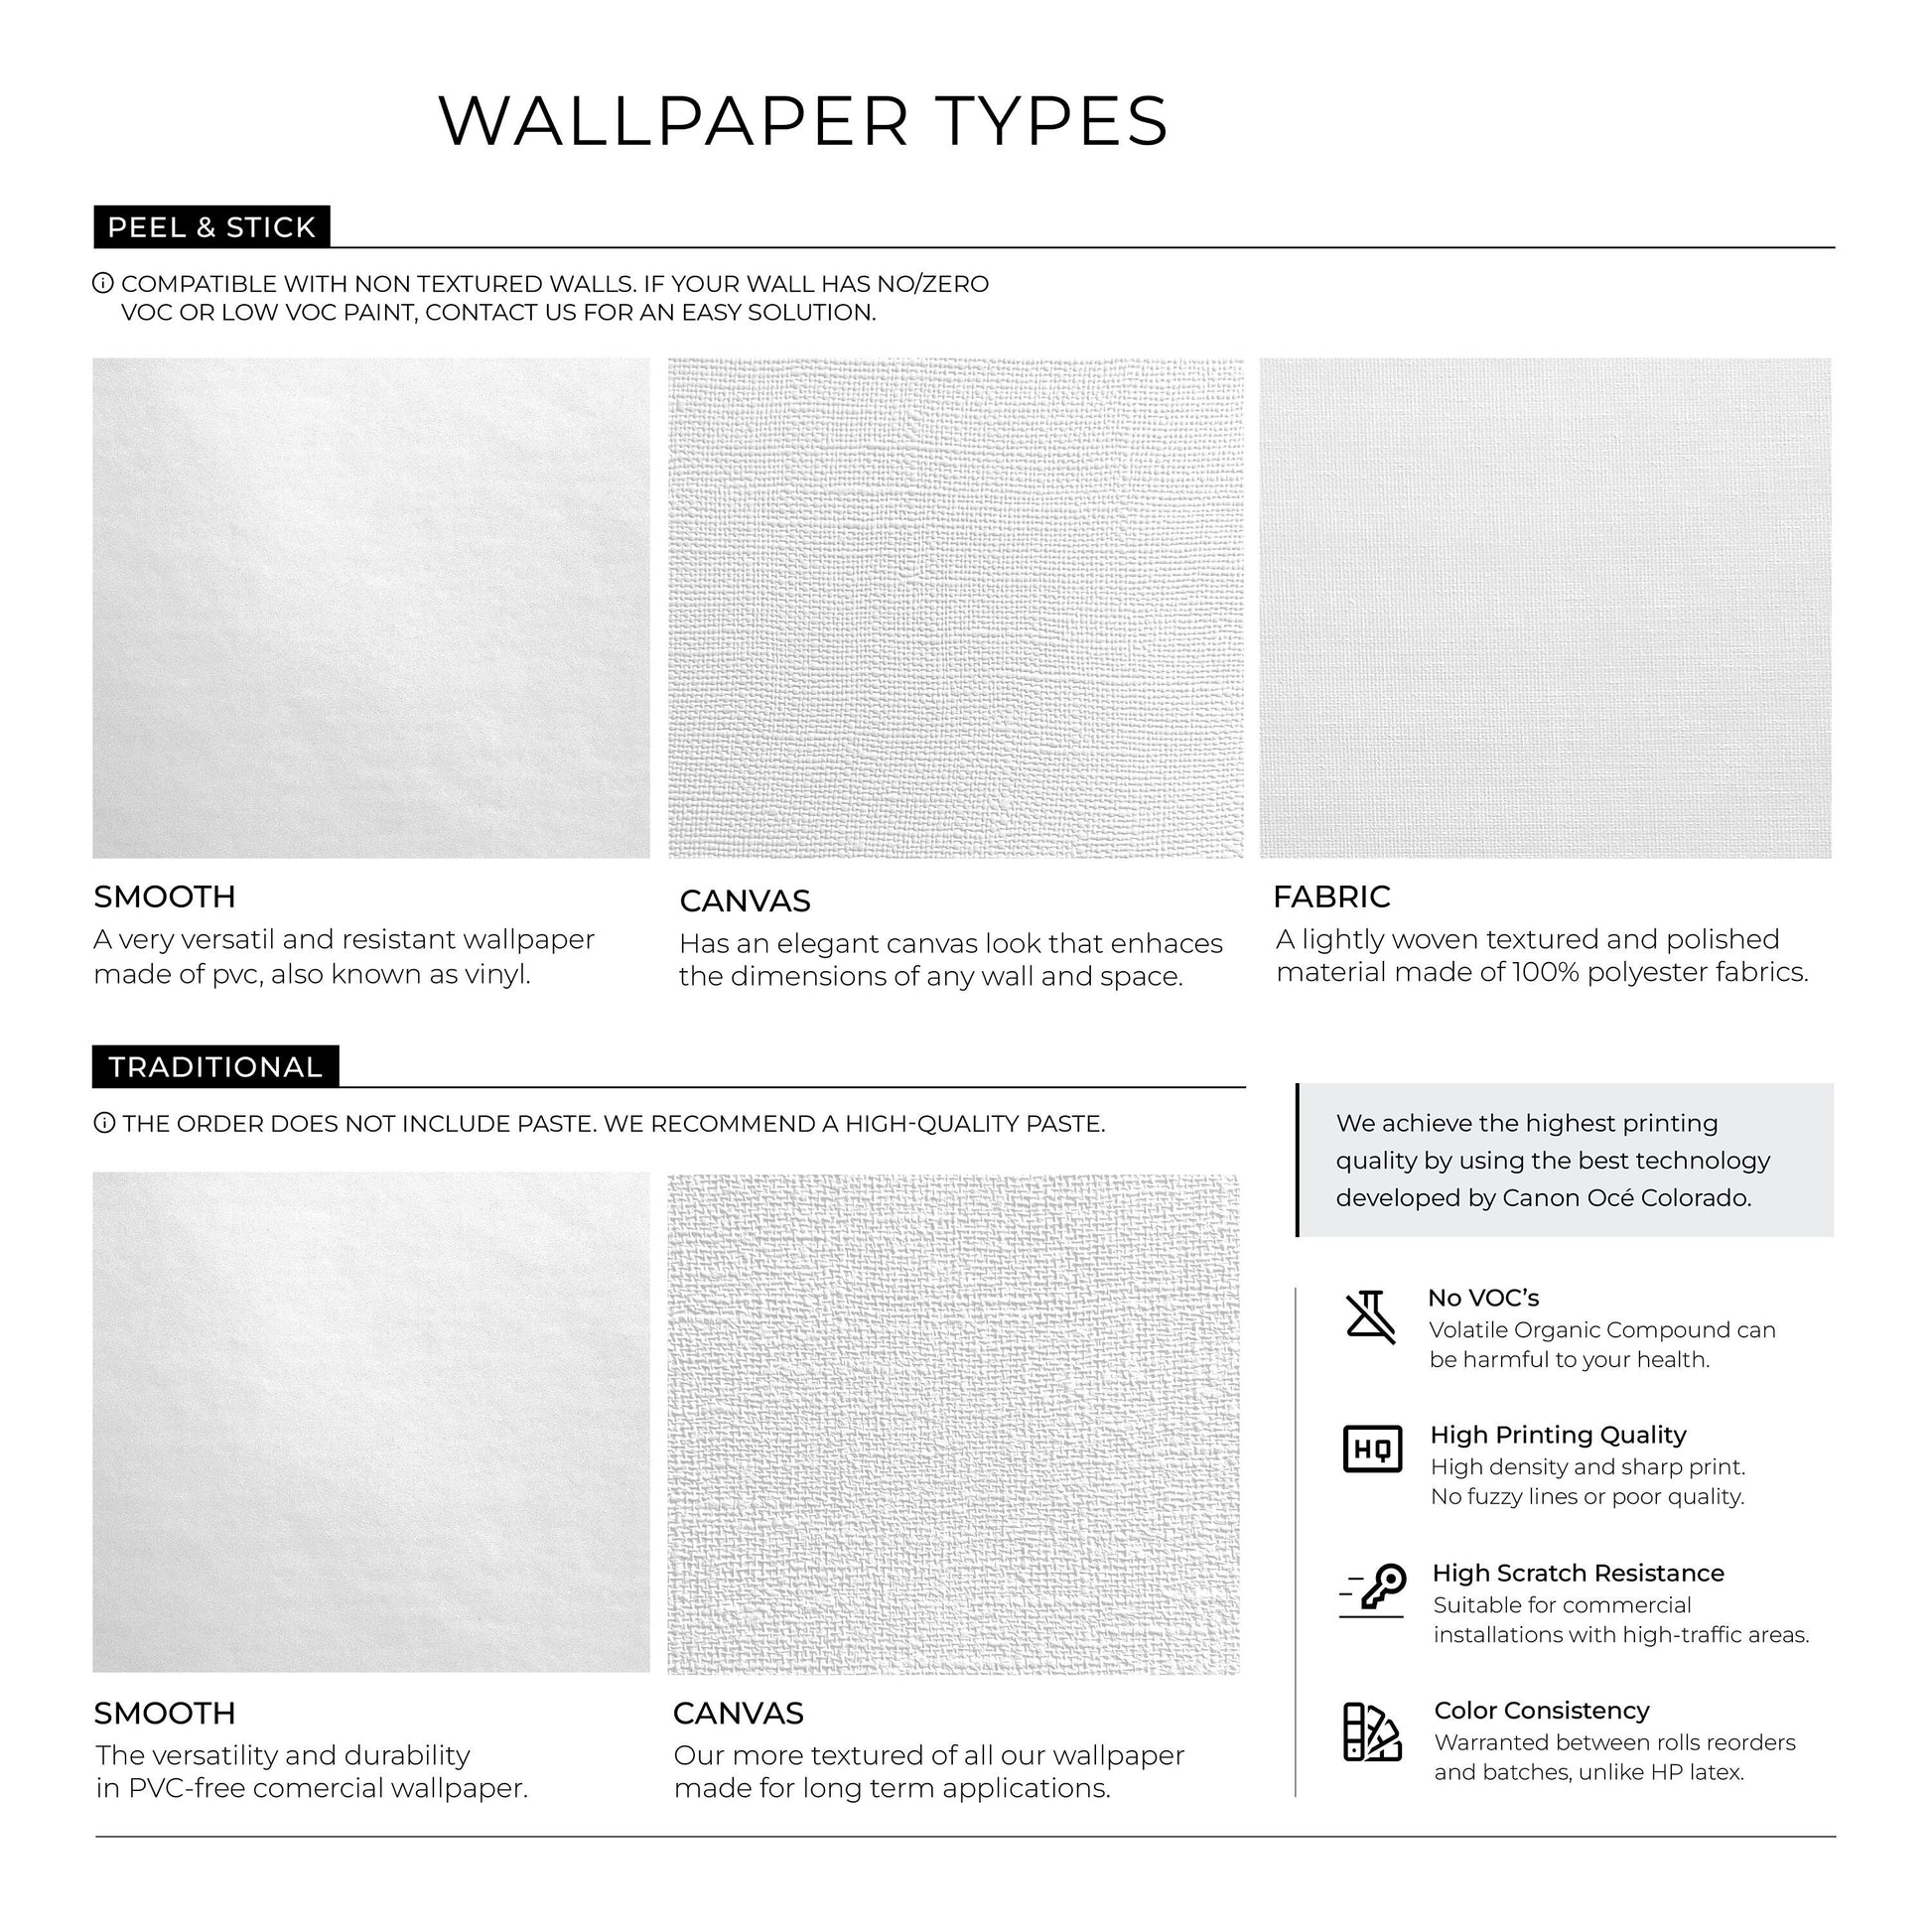 Davy's Grey Wallpaper / Solid Color / Peel and Stick Wallpaper Removable Wallpaper Home Decor Wall Art Wall Decor Room Decor - D463